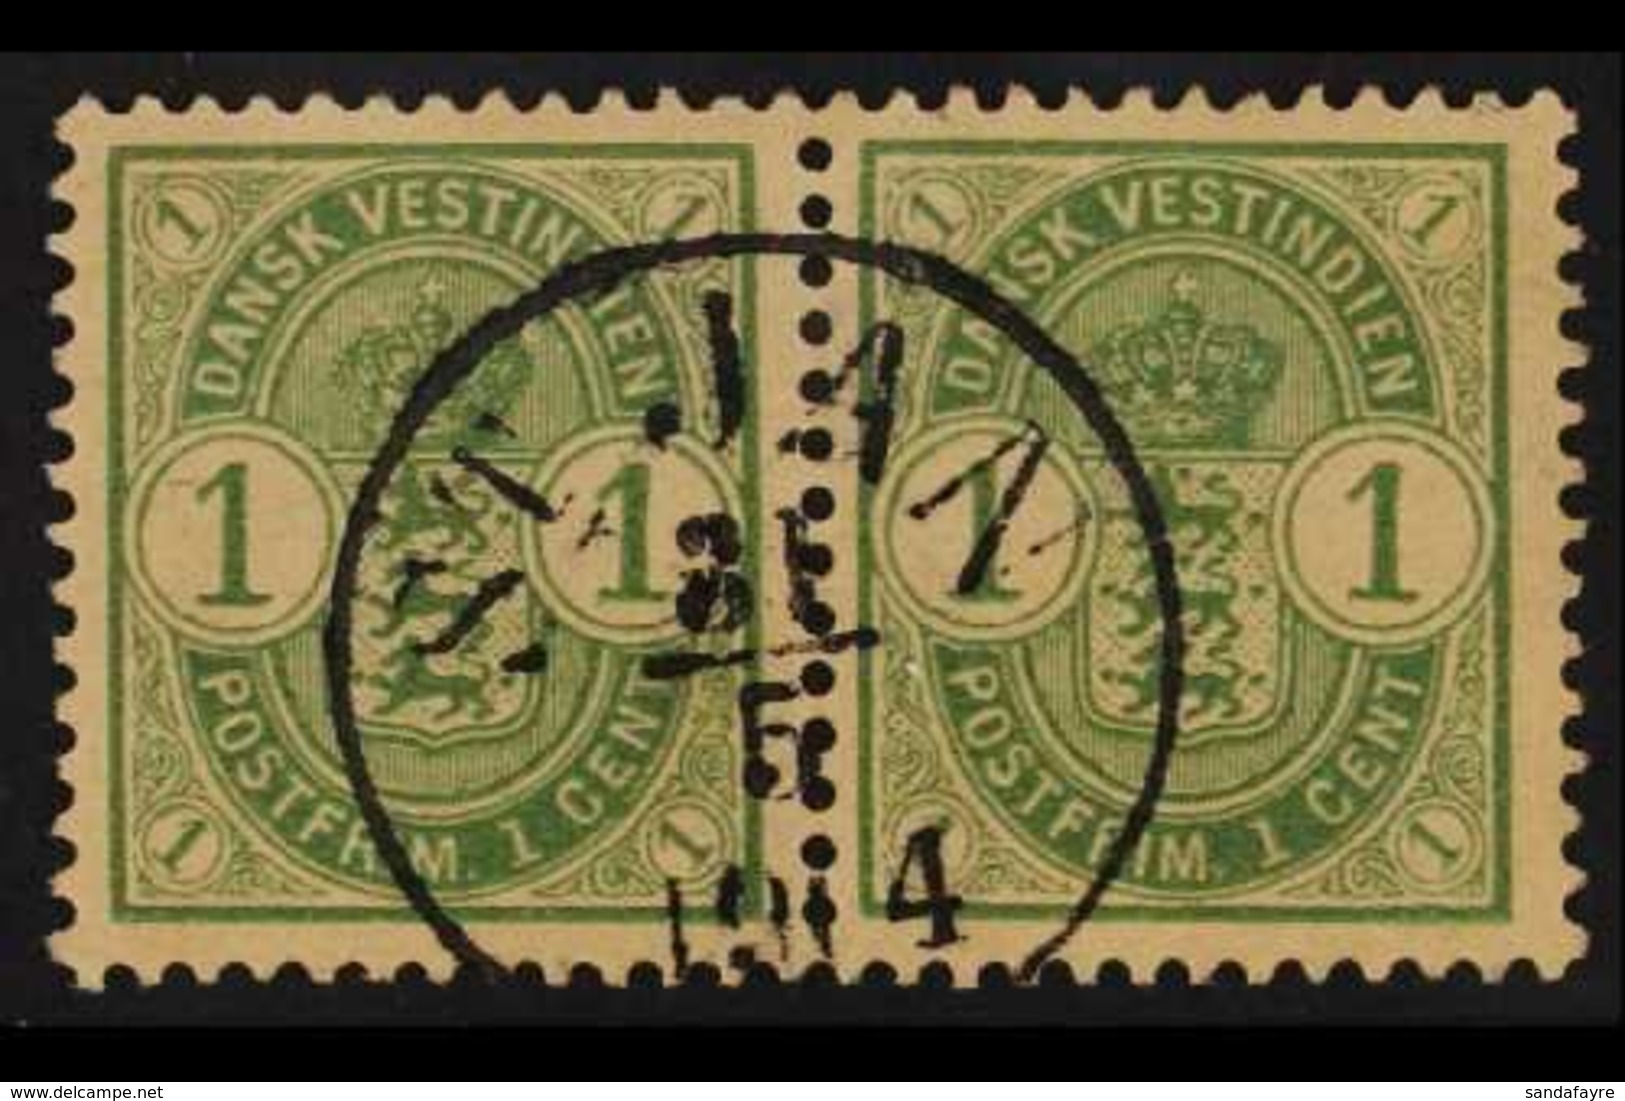 1900-03 1c Green, SG 39, Horizontal Pair With Fine "ST JAN" Cds Cancellation. For More Images, Please Visit Http://www.s - Danish West Indies